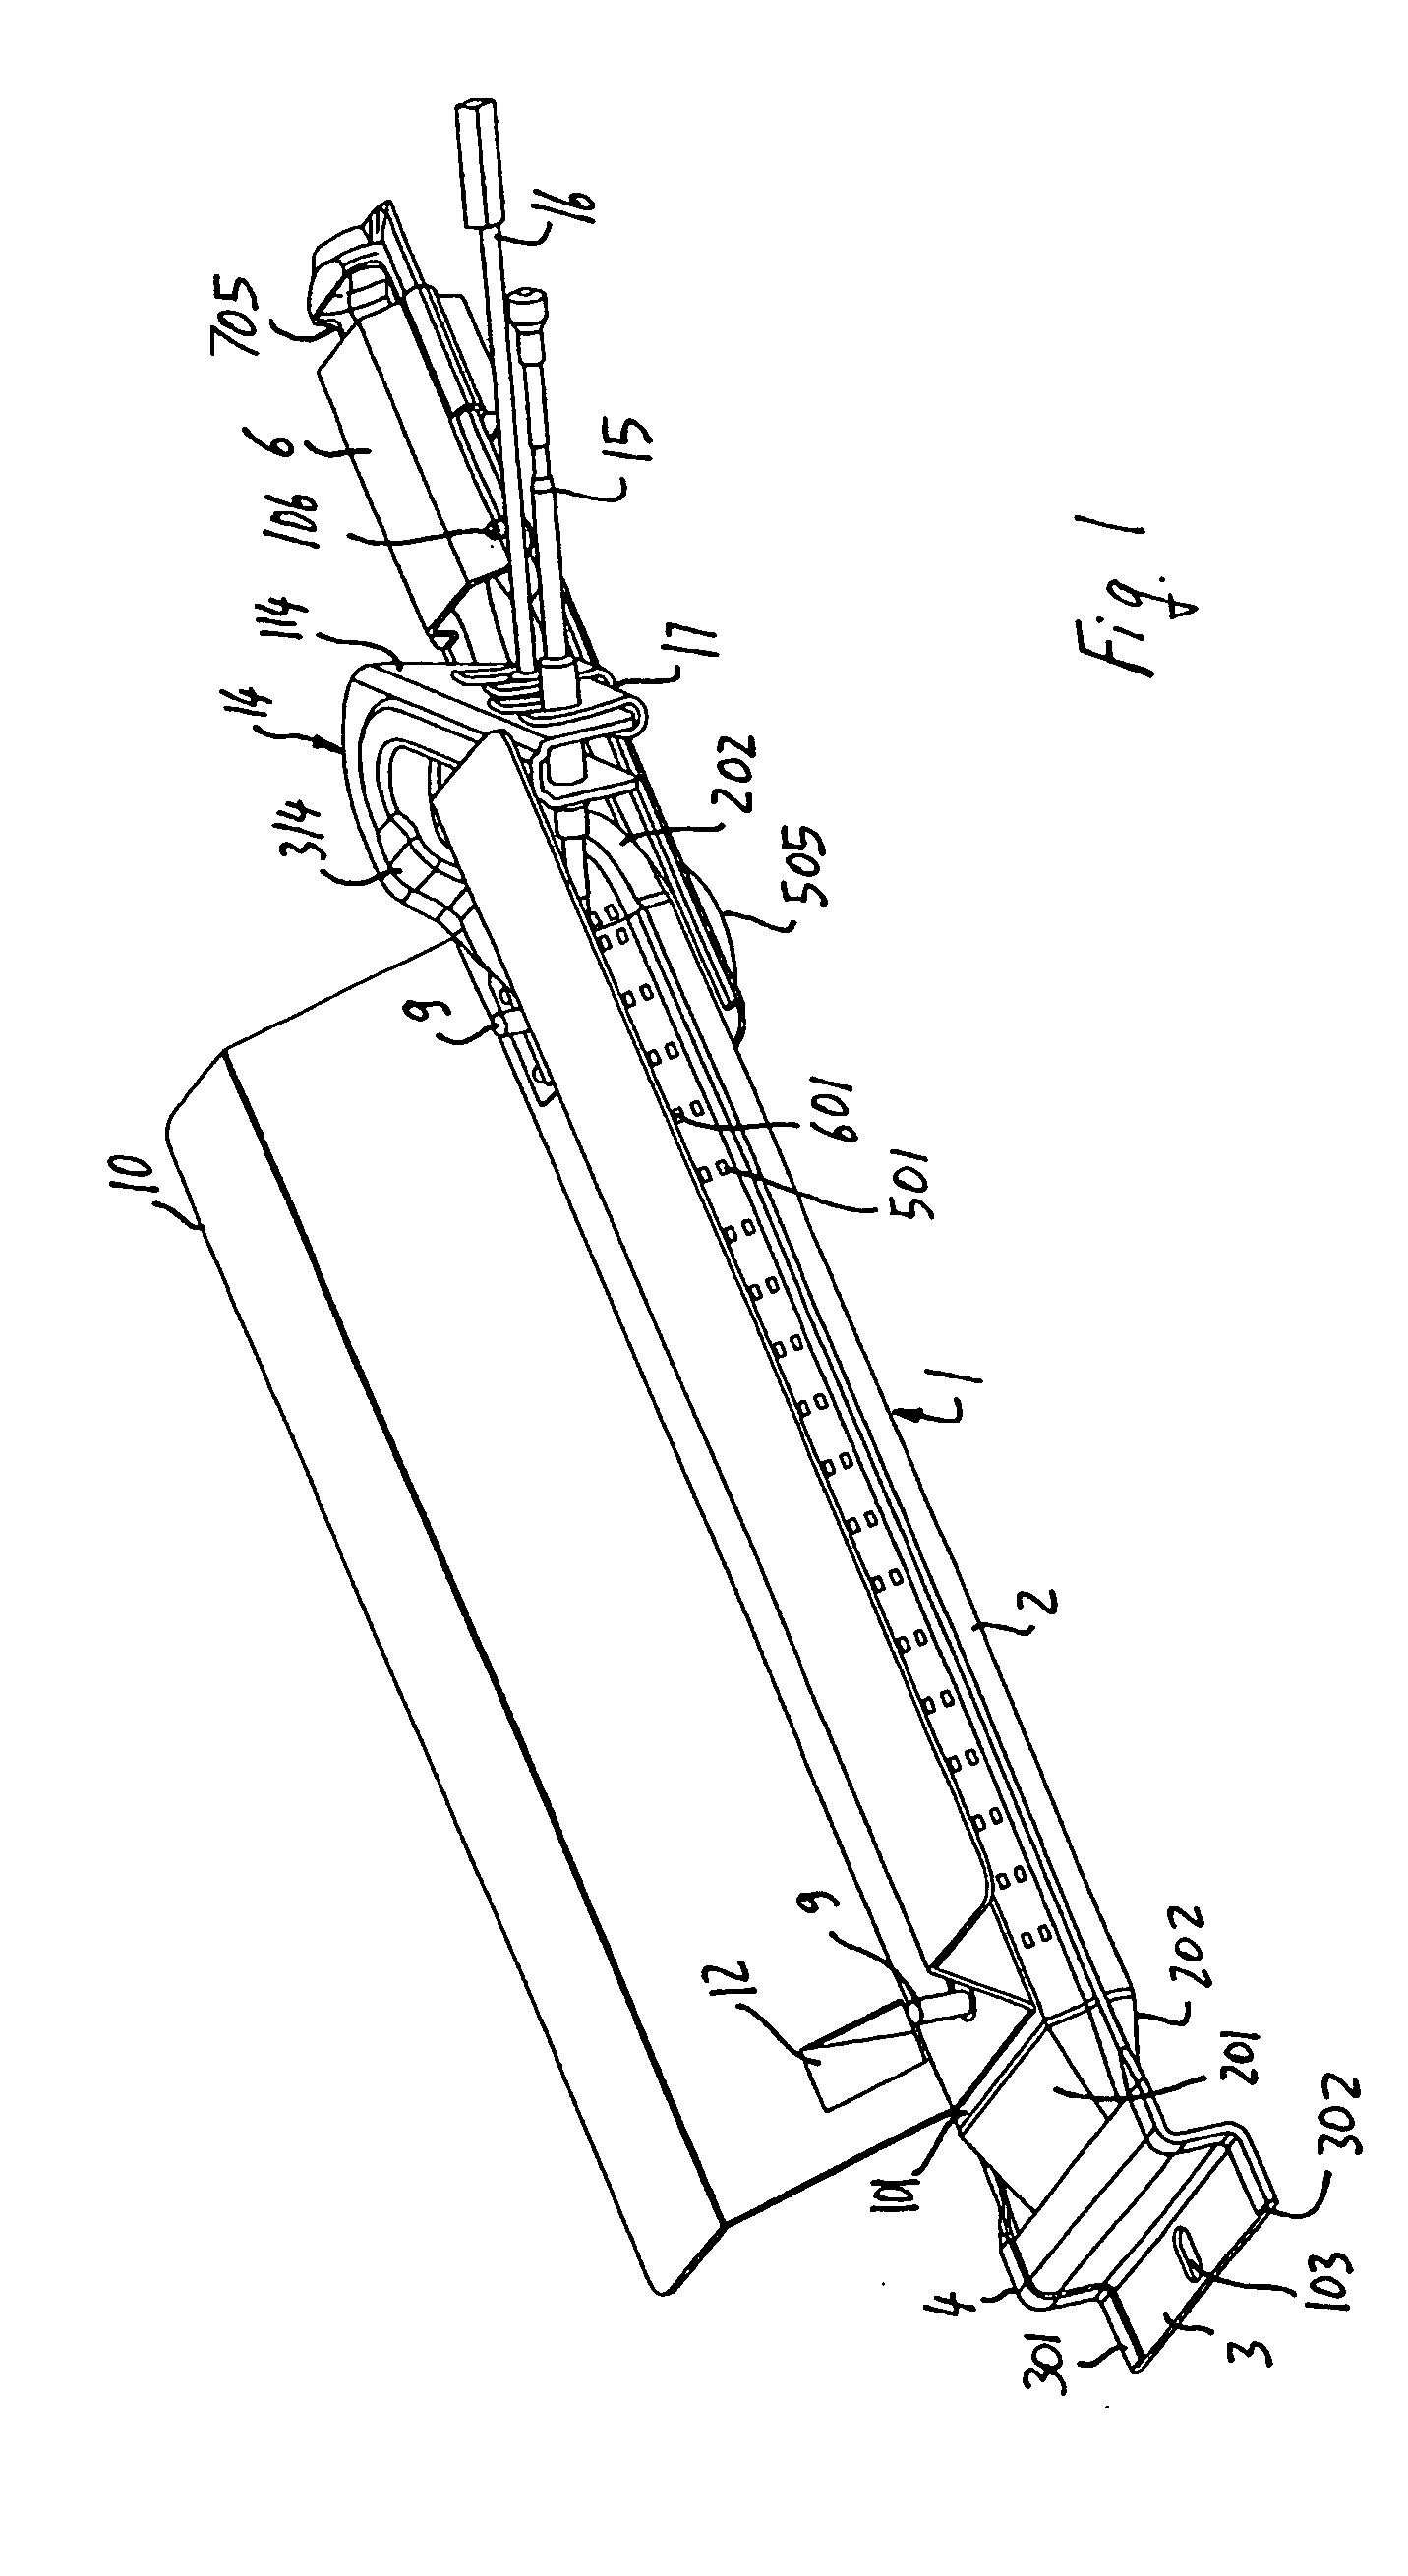 Oven or grill burner, venturi tube, mounting for a thermocouple and/or an igniter, and process for fabricating said burner